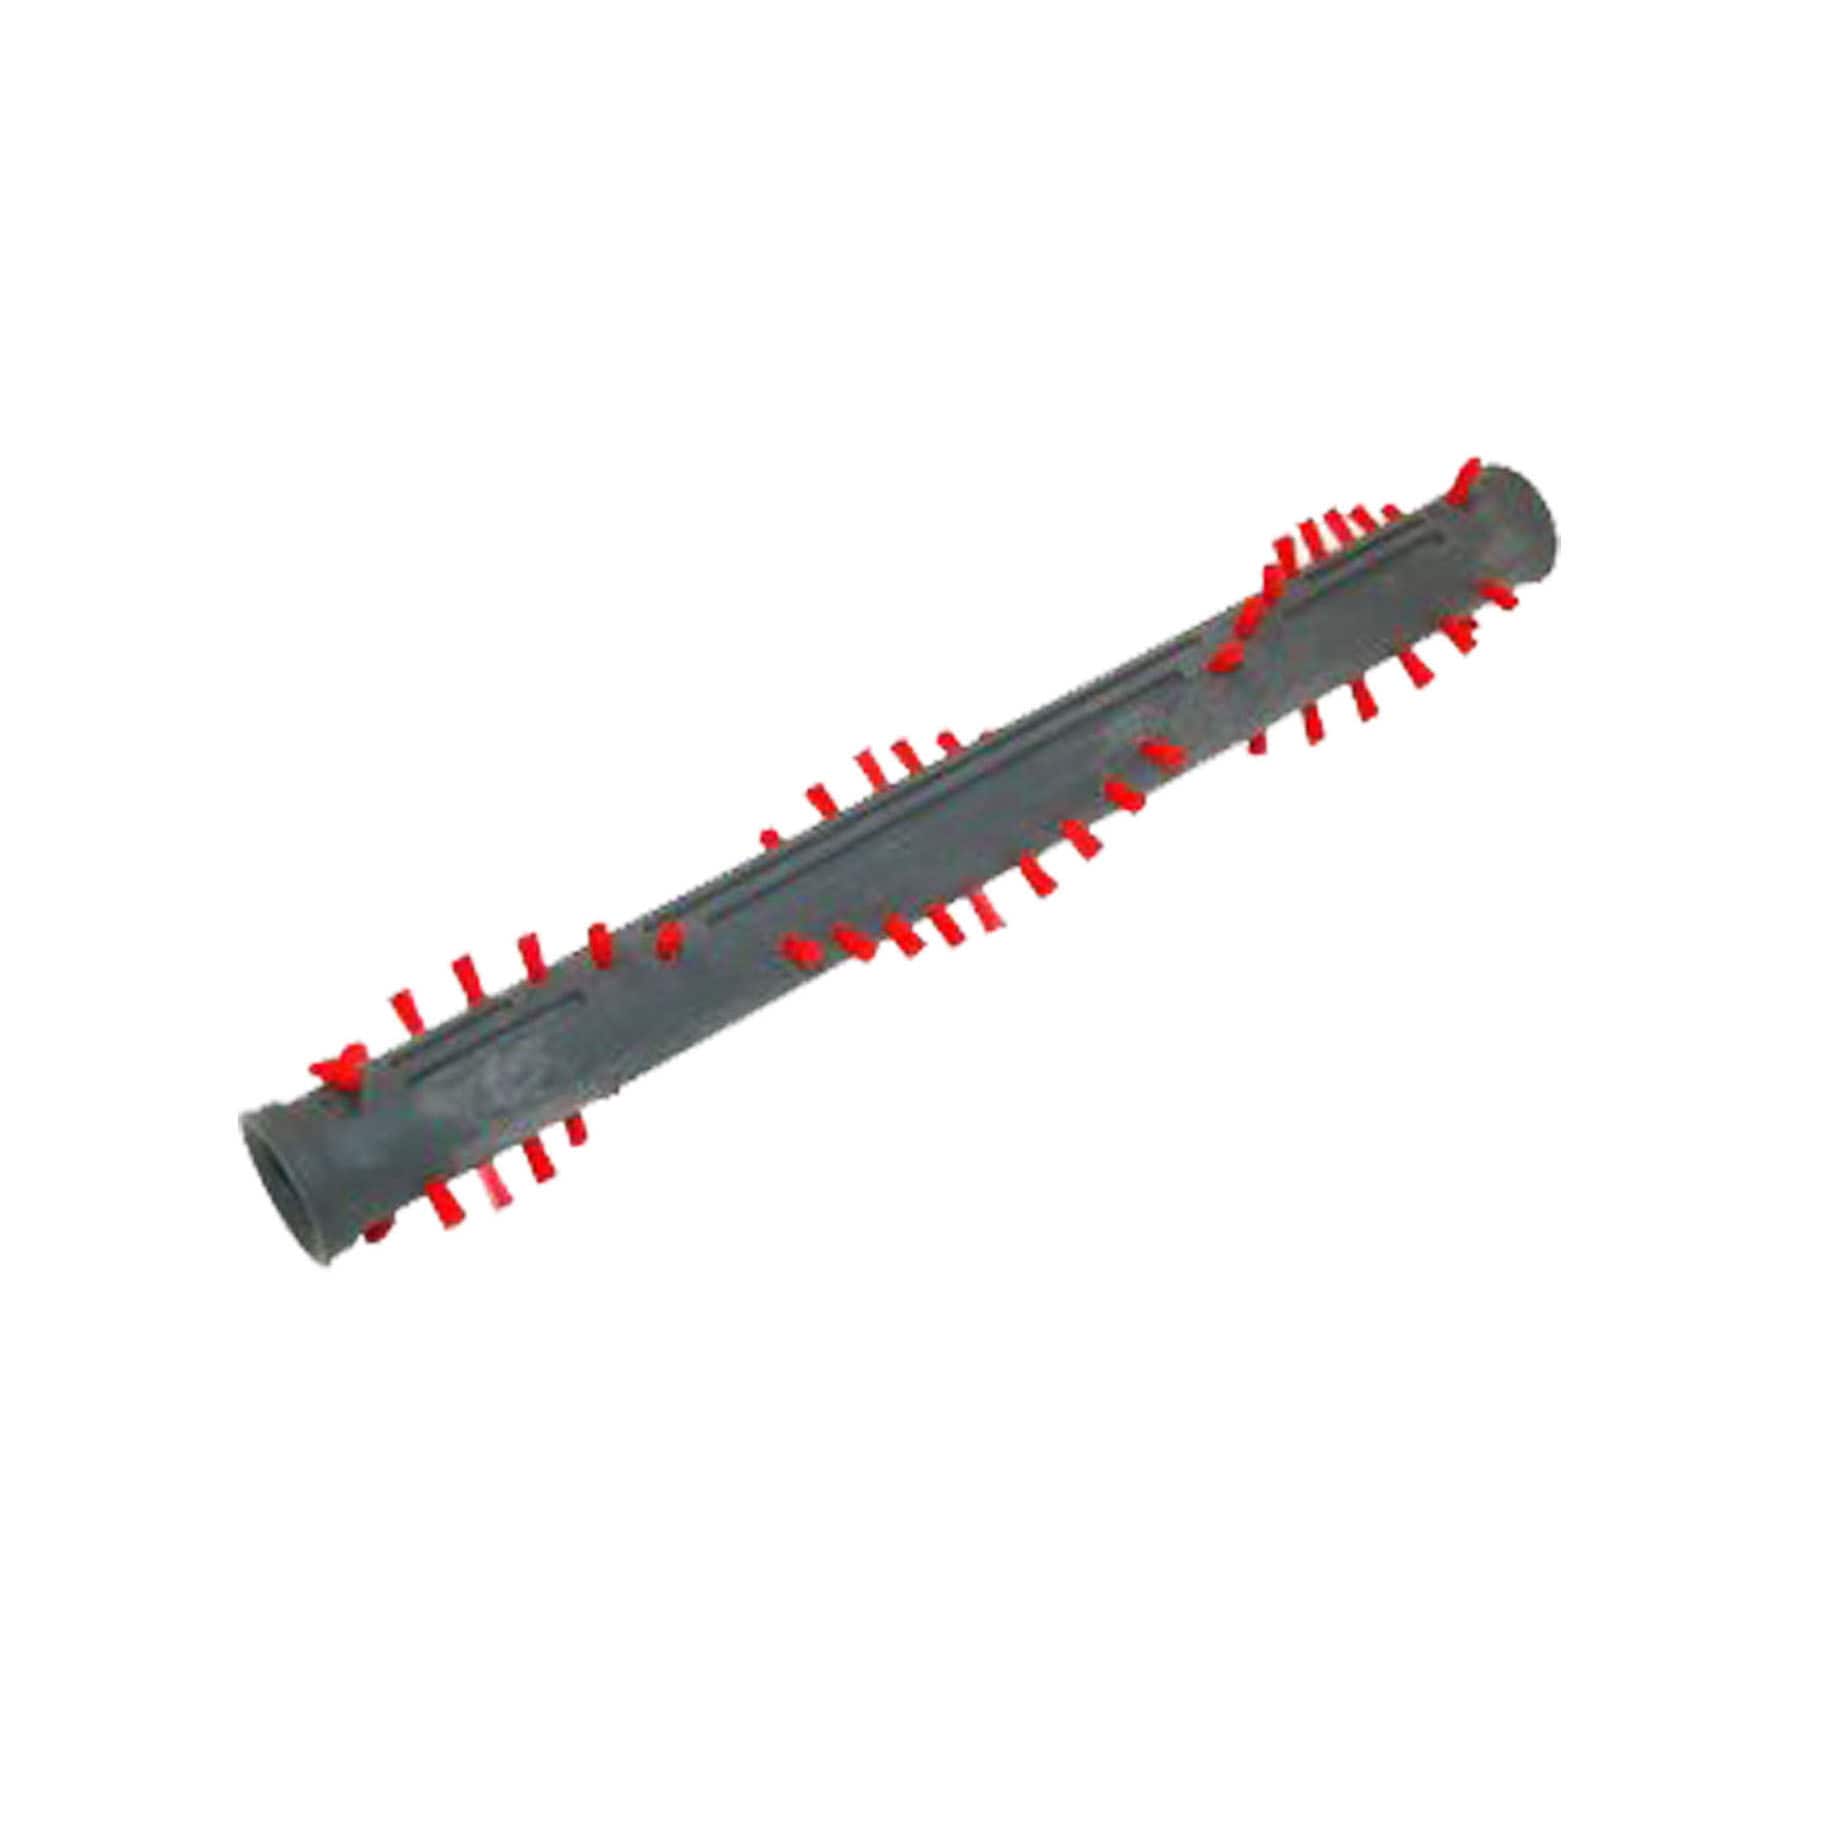 https://ak1.ostkcdn.com/images/products/10626638/Dyson-DC24-Brush-Roller-Part-917390-6ddf8d65-8ff2-4e0a-b91f-289f1f8c52ba.jpg